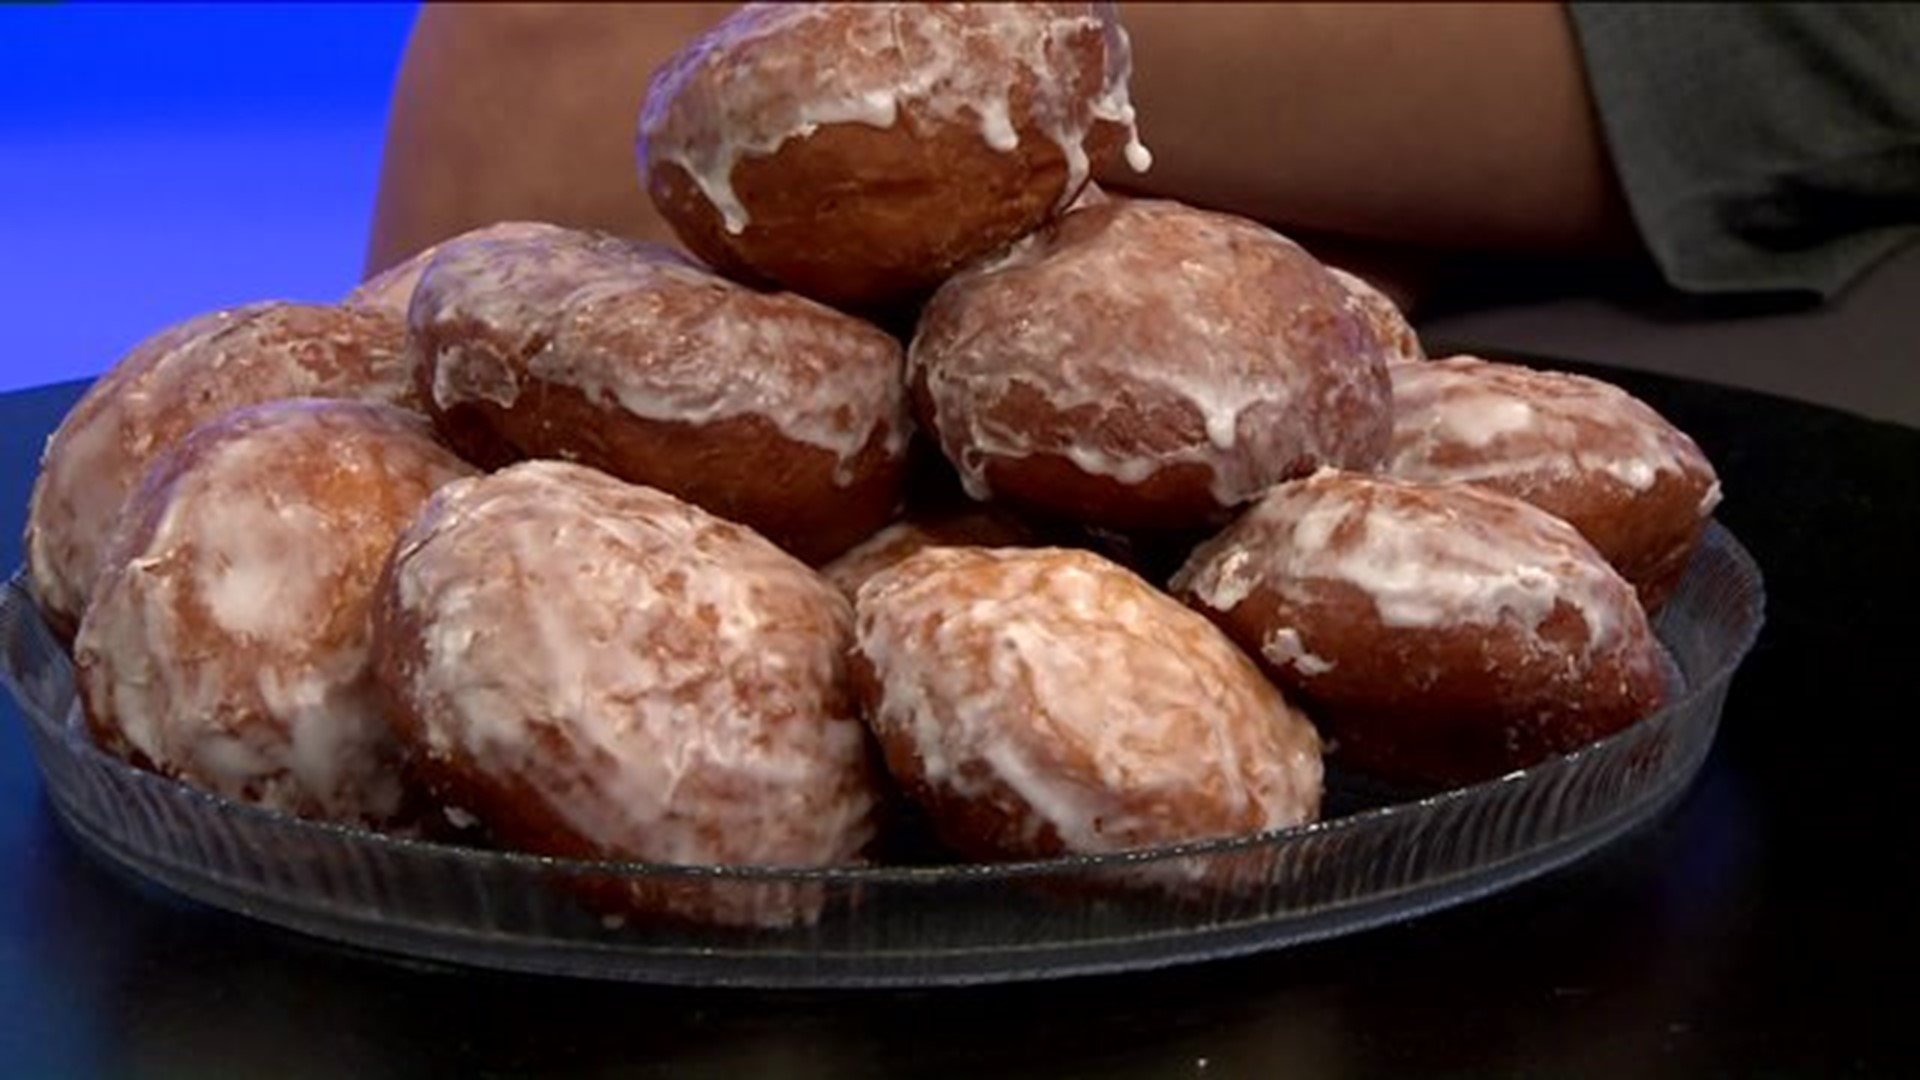 Getting ready for Fat Tuesday with paczkis or Polish donuts